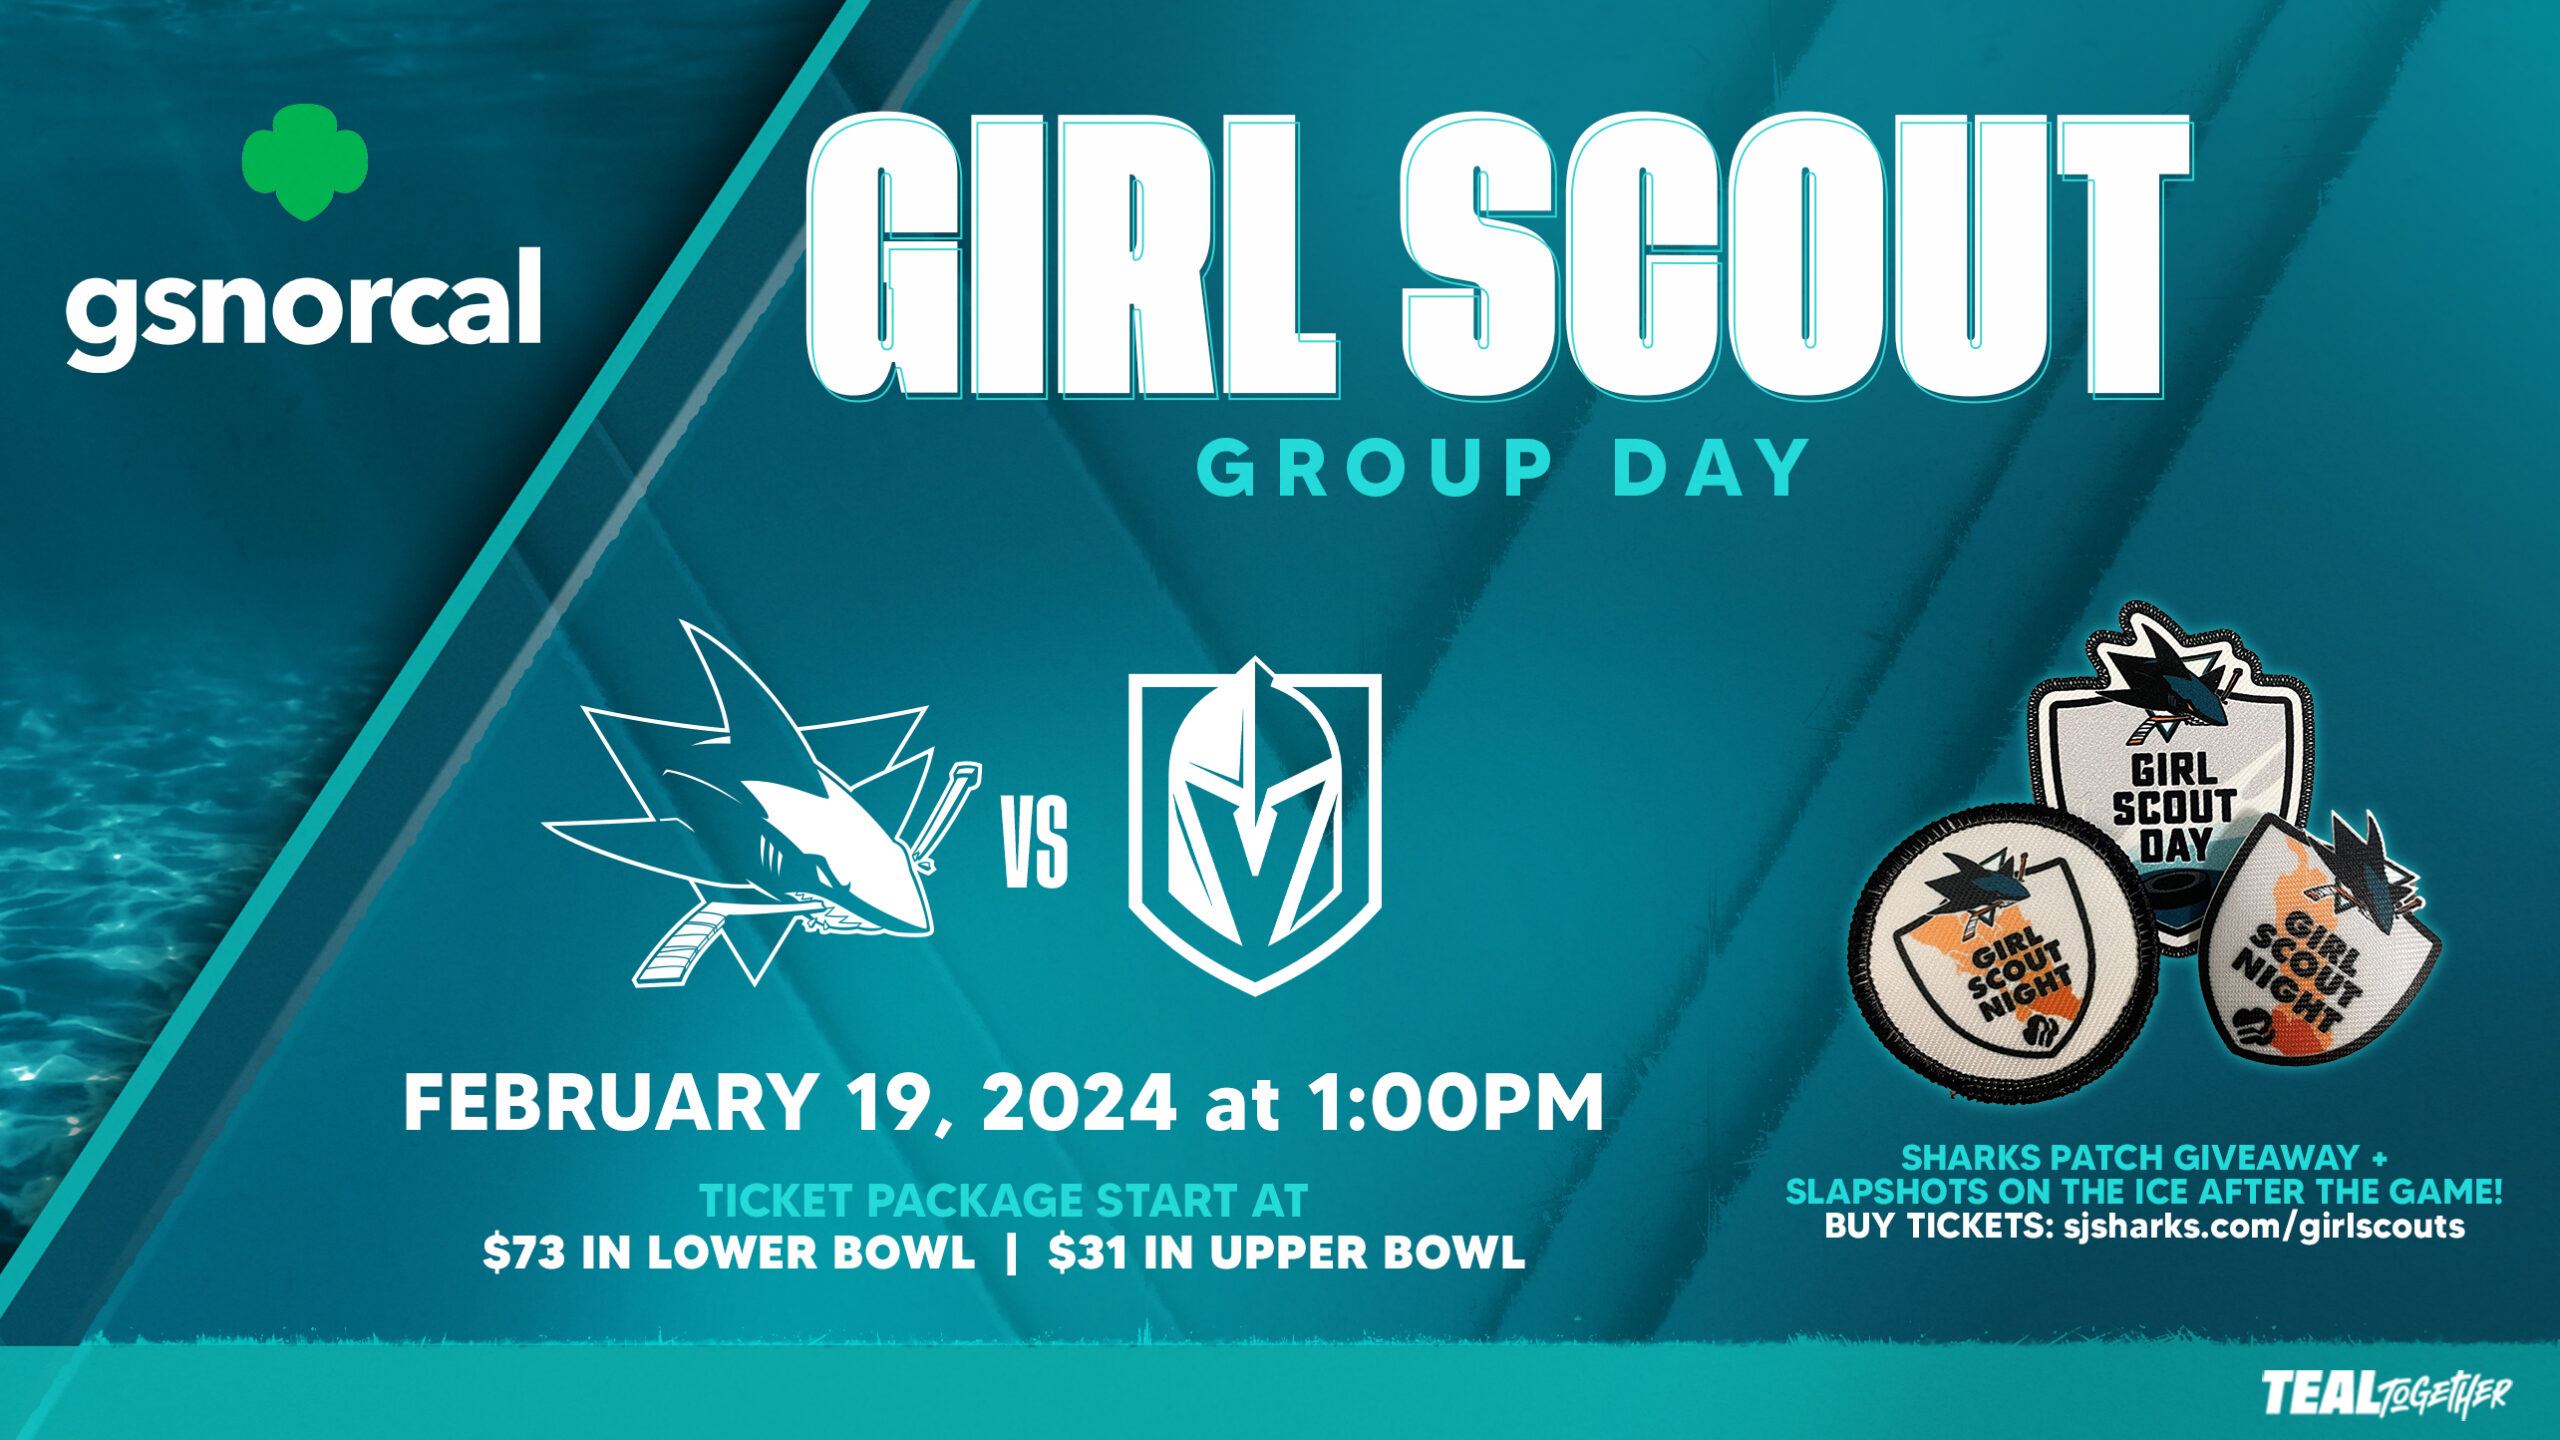 Girl Scout Night with the Sharks vs Golden Knights GsNorcal Events